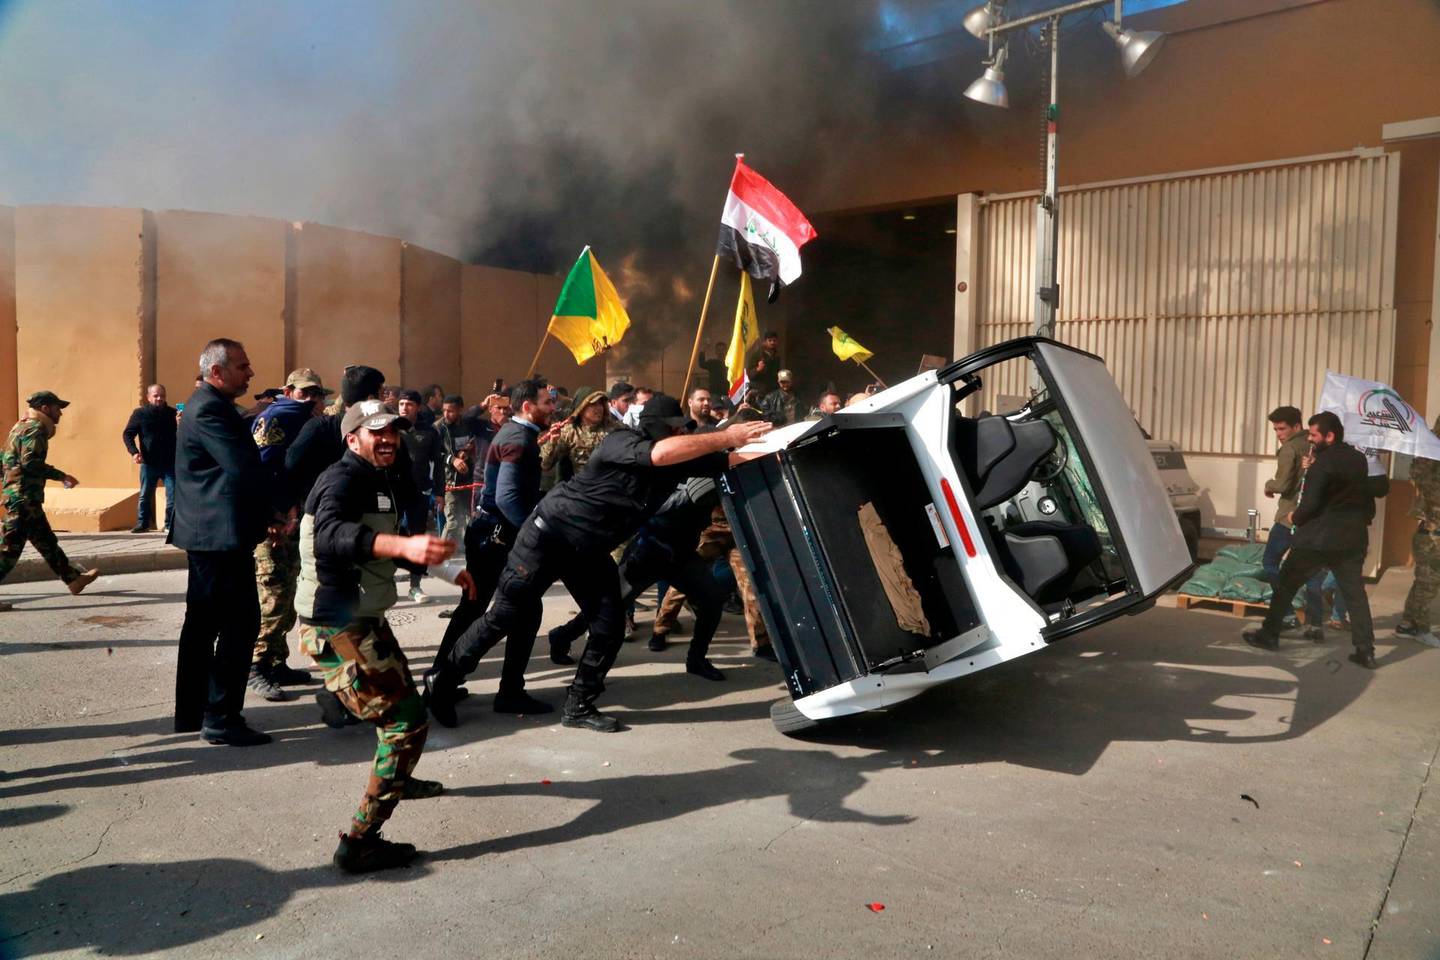 FILE - In this Dec 31, 2019  file photo, pro-Iranian militiamen and their supporters damage property inside the U.S. embassy compound, in Baghdad, Iraq. The Trump administration has signaled it could close its diplomatic mission in Baghdad if measures are not taken to control rogue armed elements responsible for a recent spate of attacks against U.S. and other interests in the country, Iraqi and U.S. officials said Monday, Sept. 28, 2020. (AP Photo/Khalid Mohammed, File)